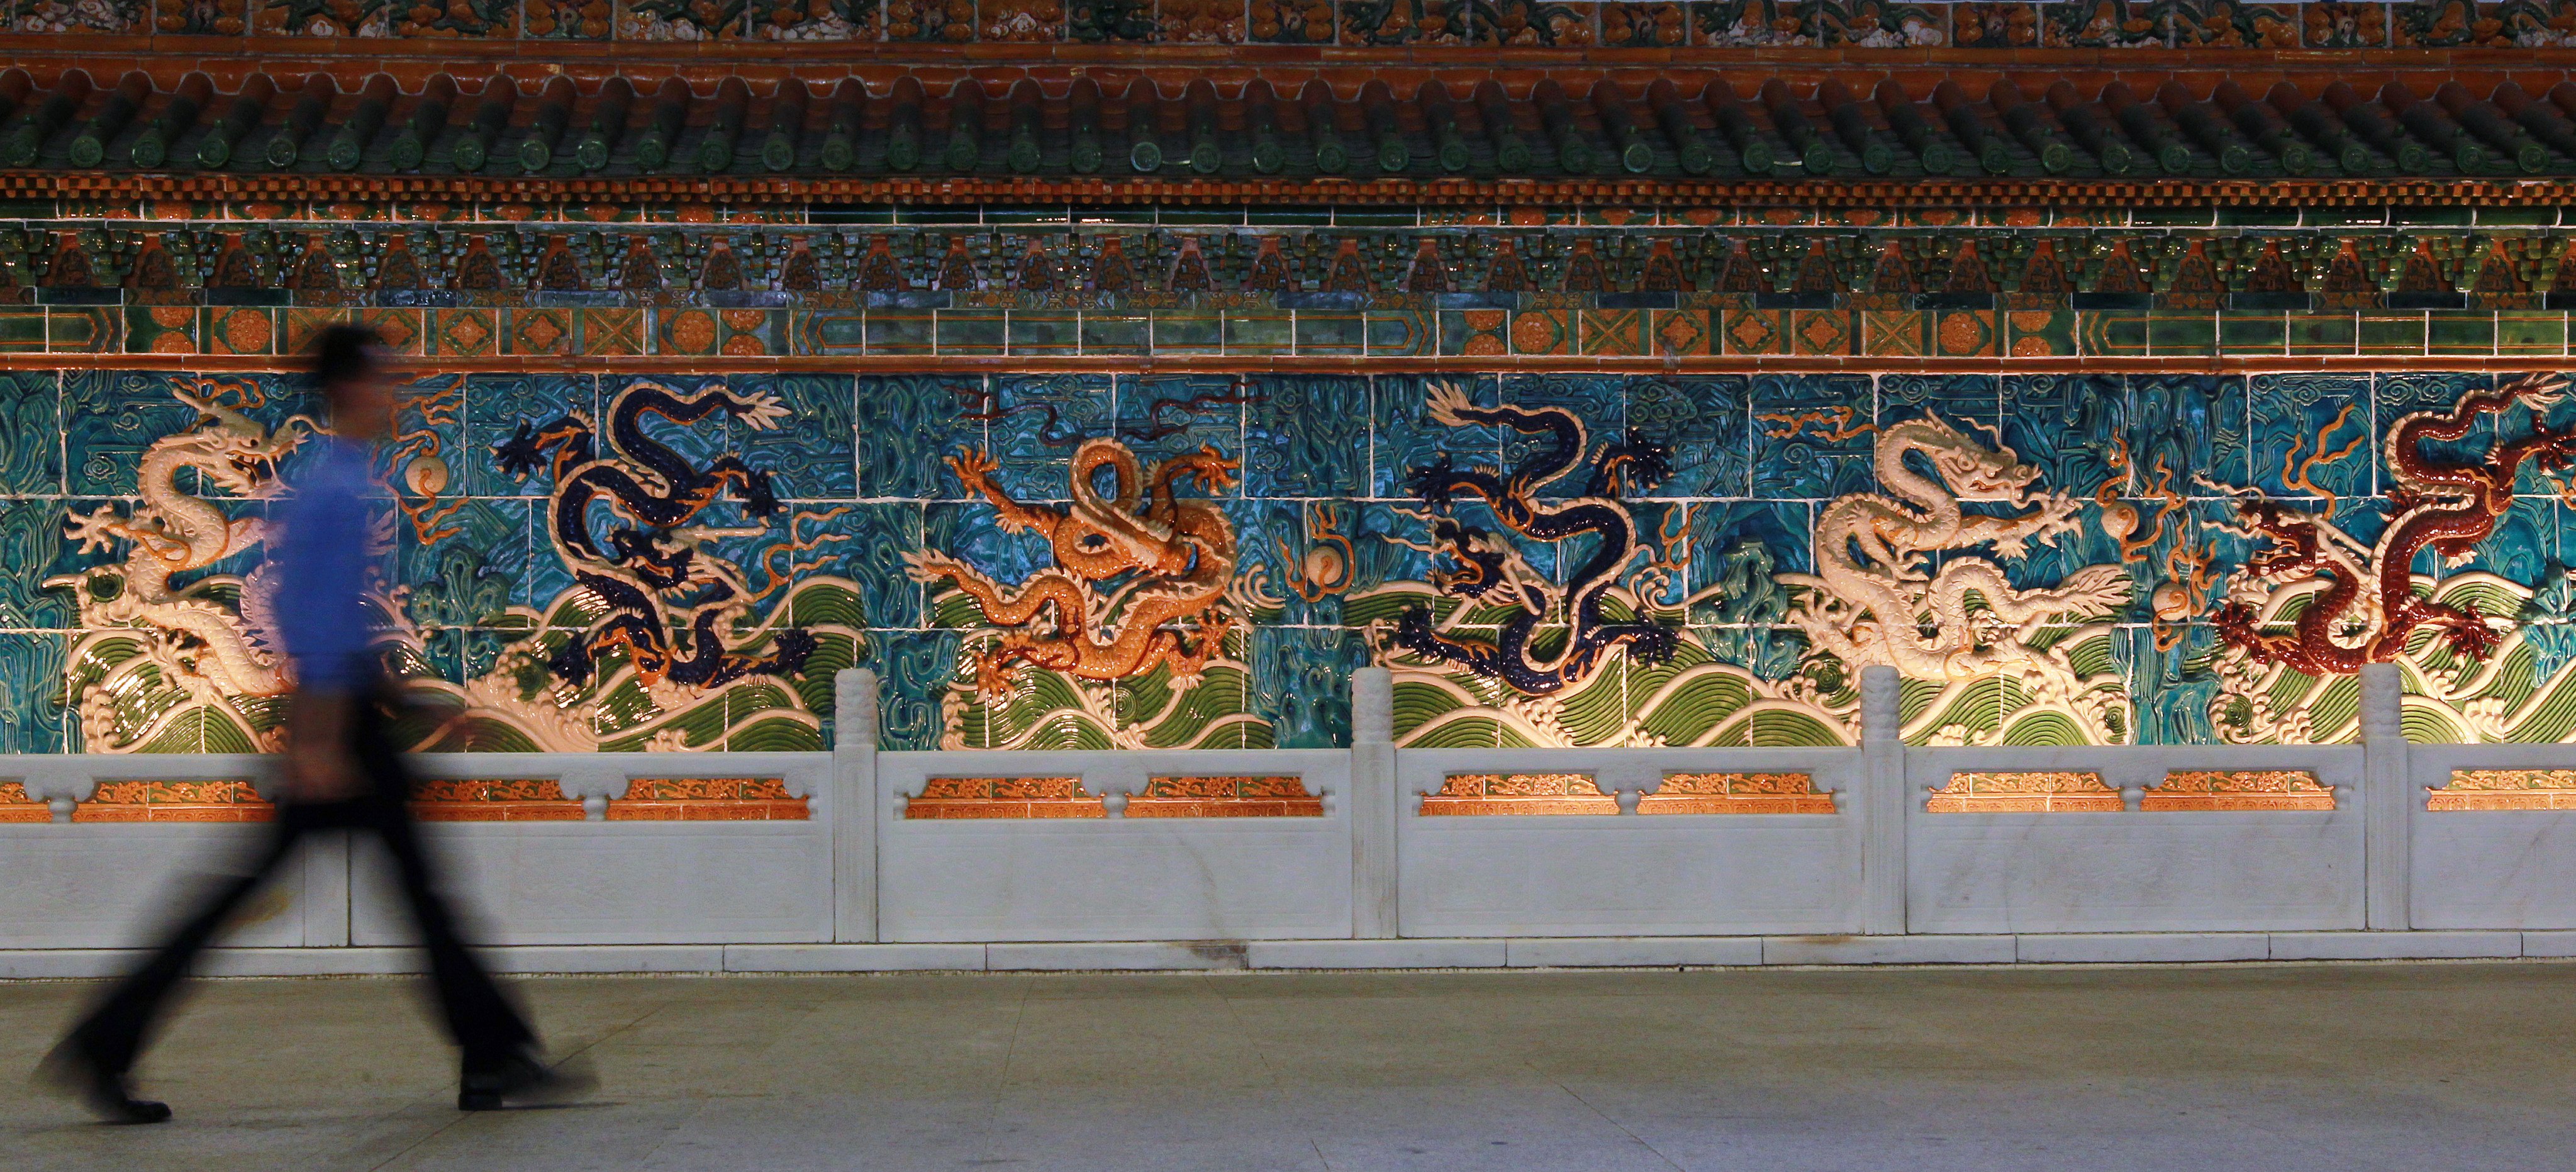 The Nine Dragon Wall at the China Resources Buildings in Wan Chai 